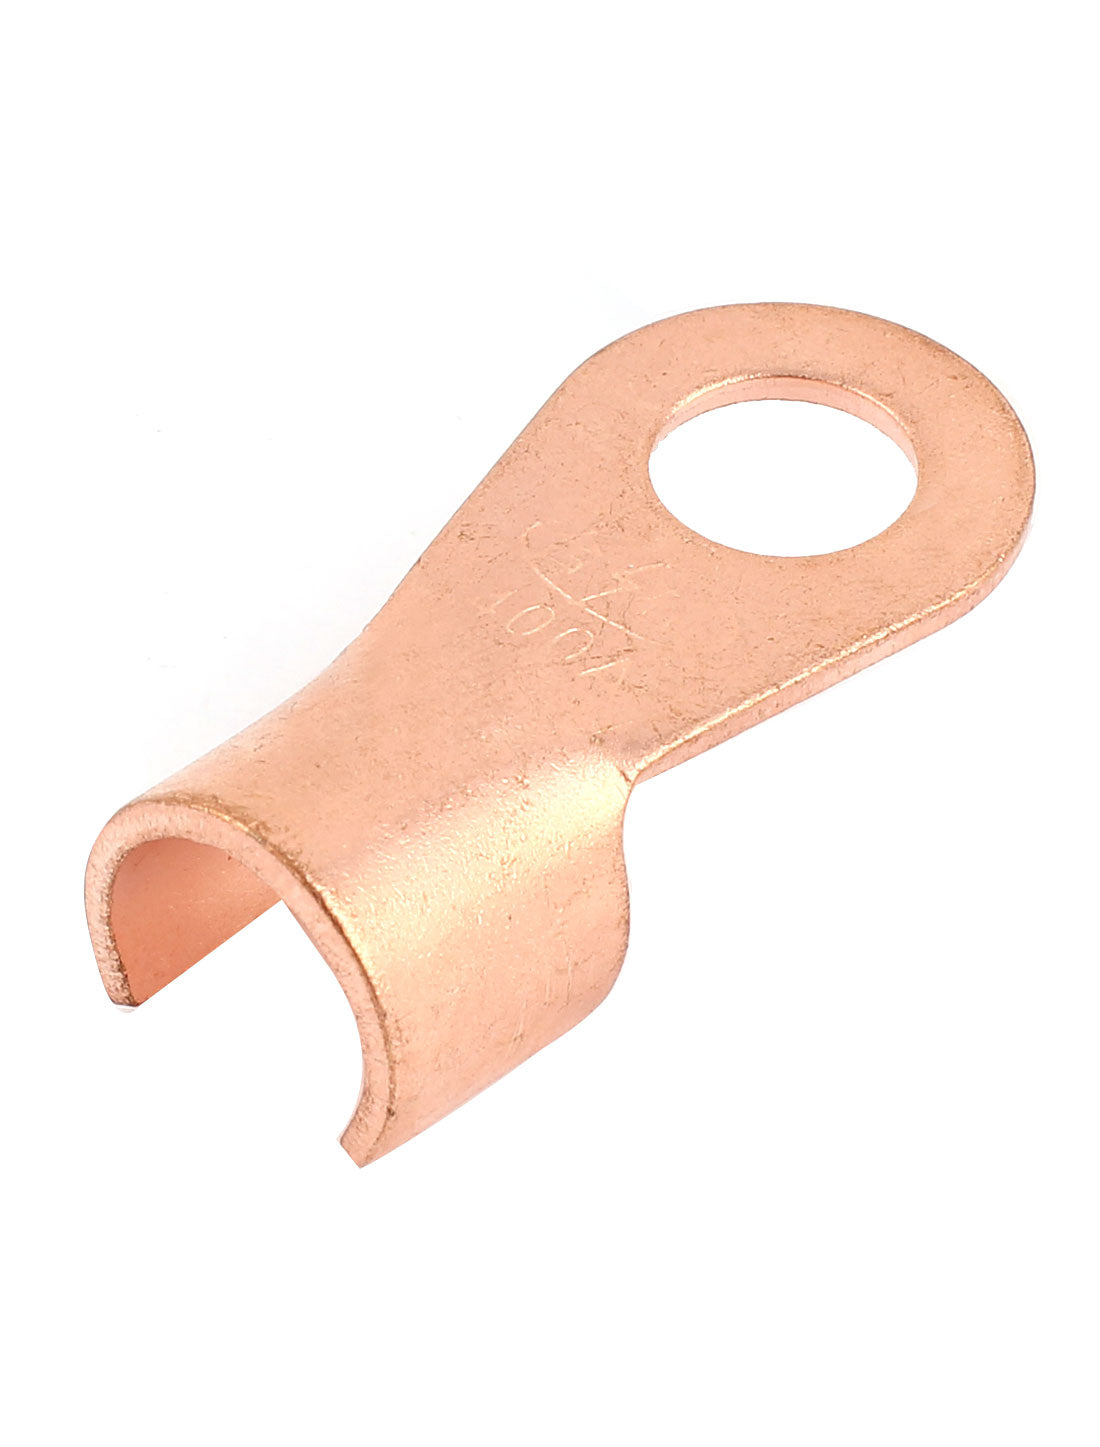 uxcell Uxcell 400A Open Copper Battery Crimp Terminal Cable Wire Lugs 15mm Ring for 1/2 Stud